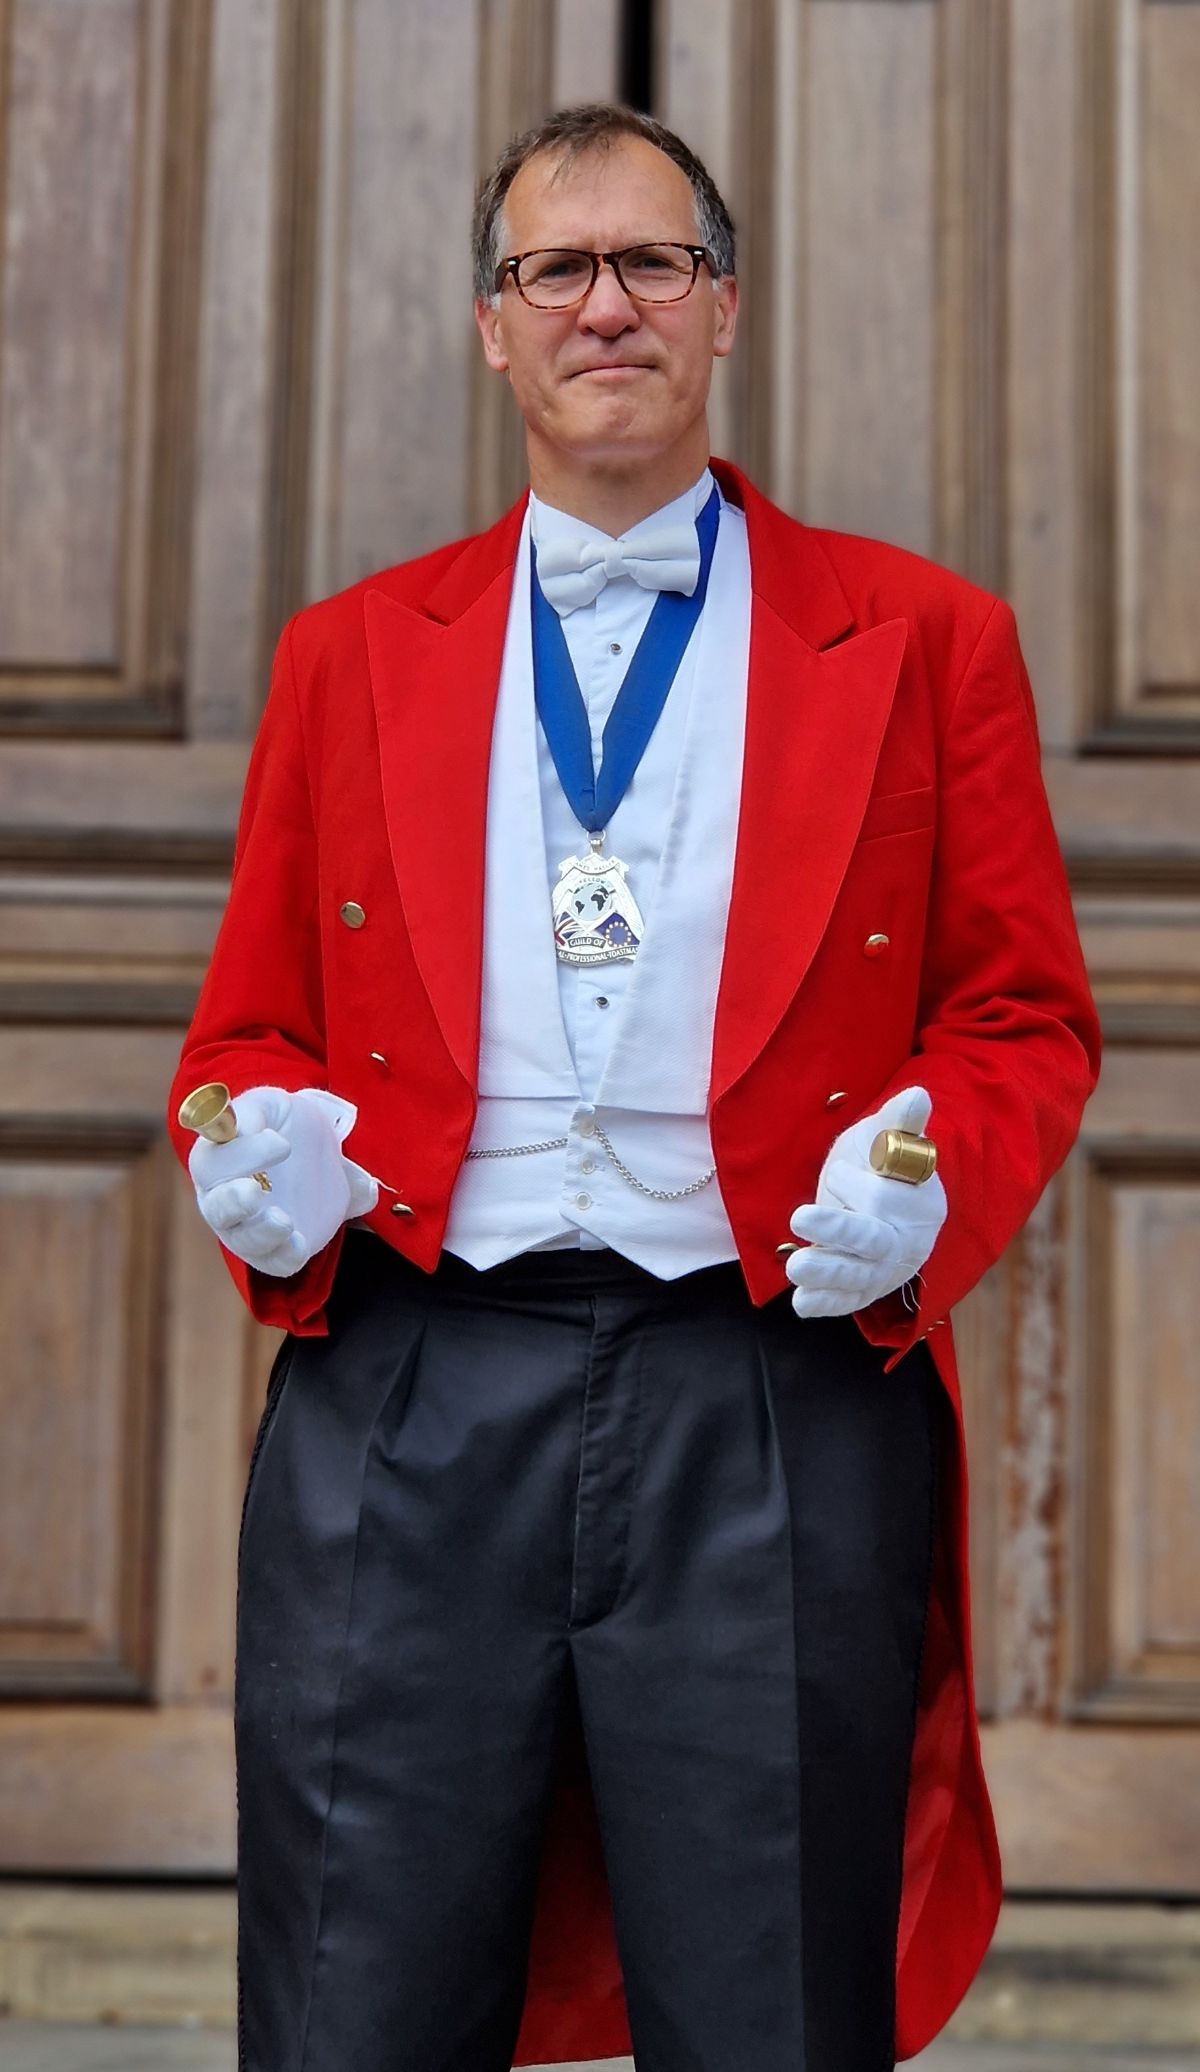 The Man in the Red Coat - Toastmaster James Hasler-Image-45